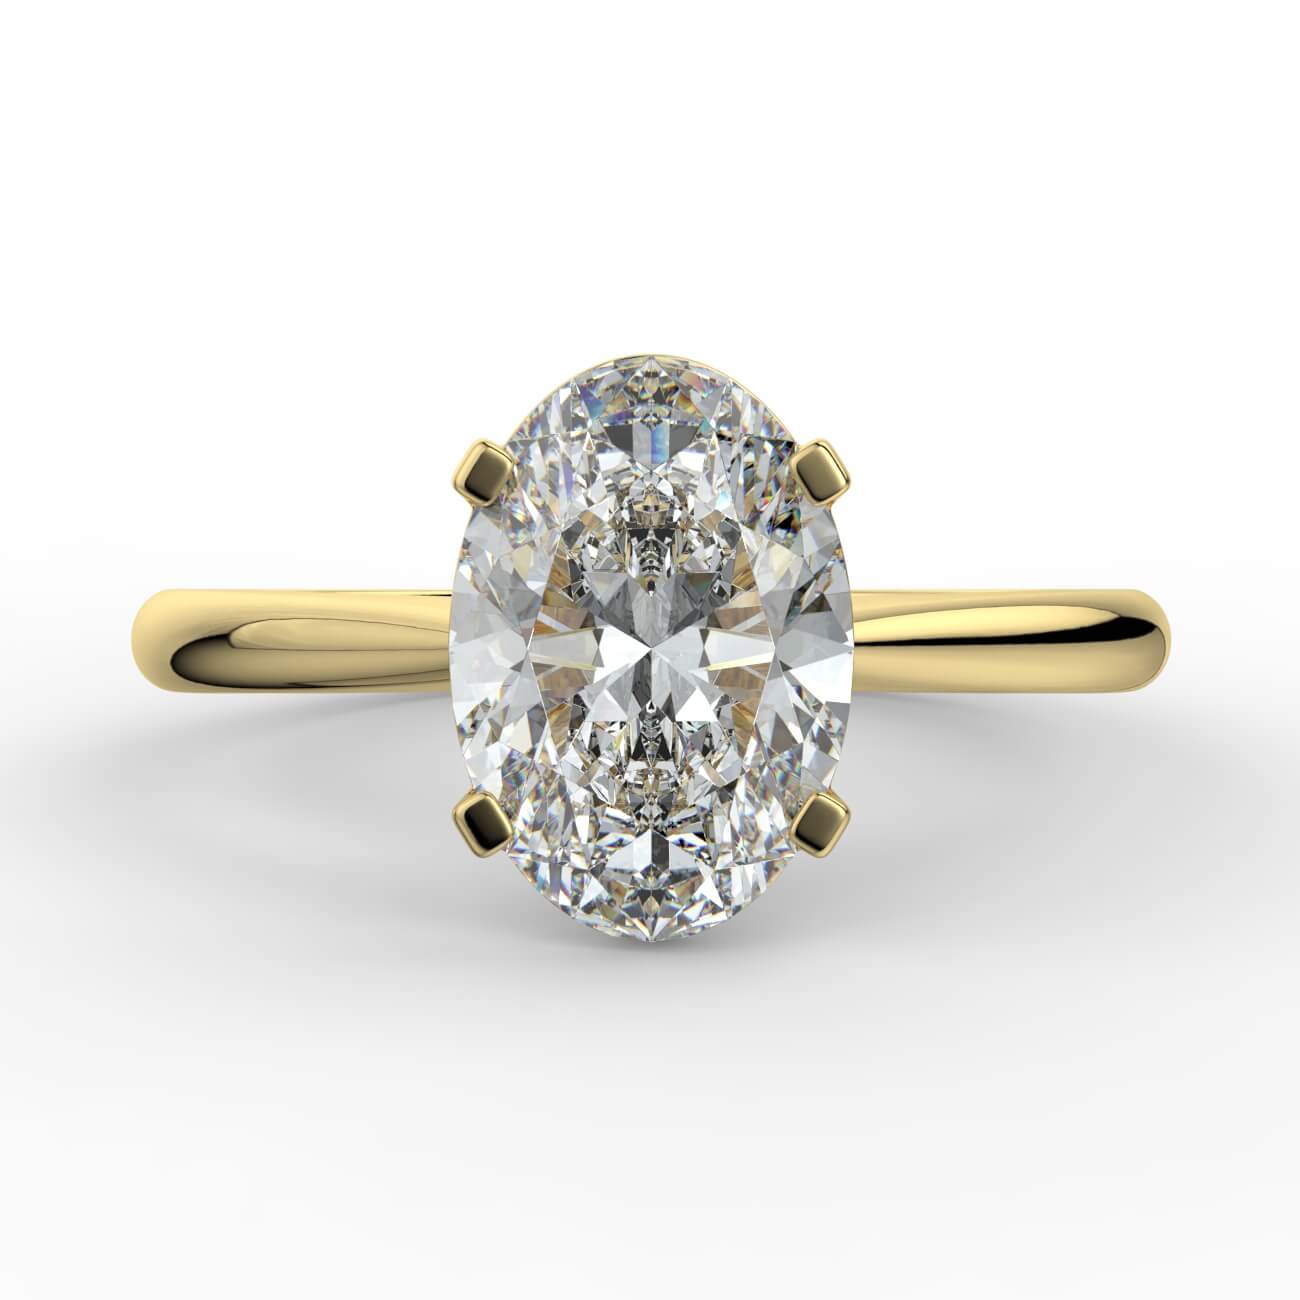 Oval cut diamond cathedral engagement ring in yellow gold – Australian Diamond Network